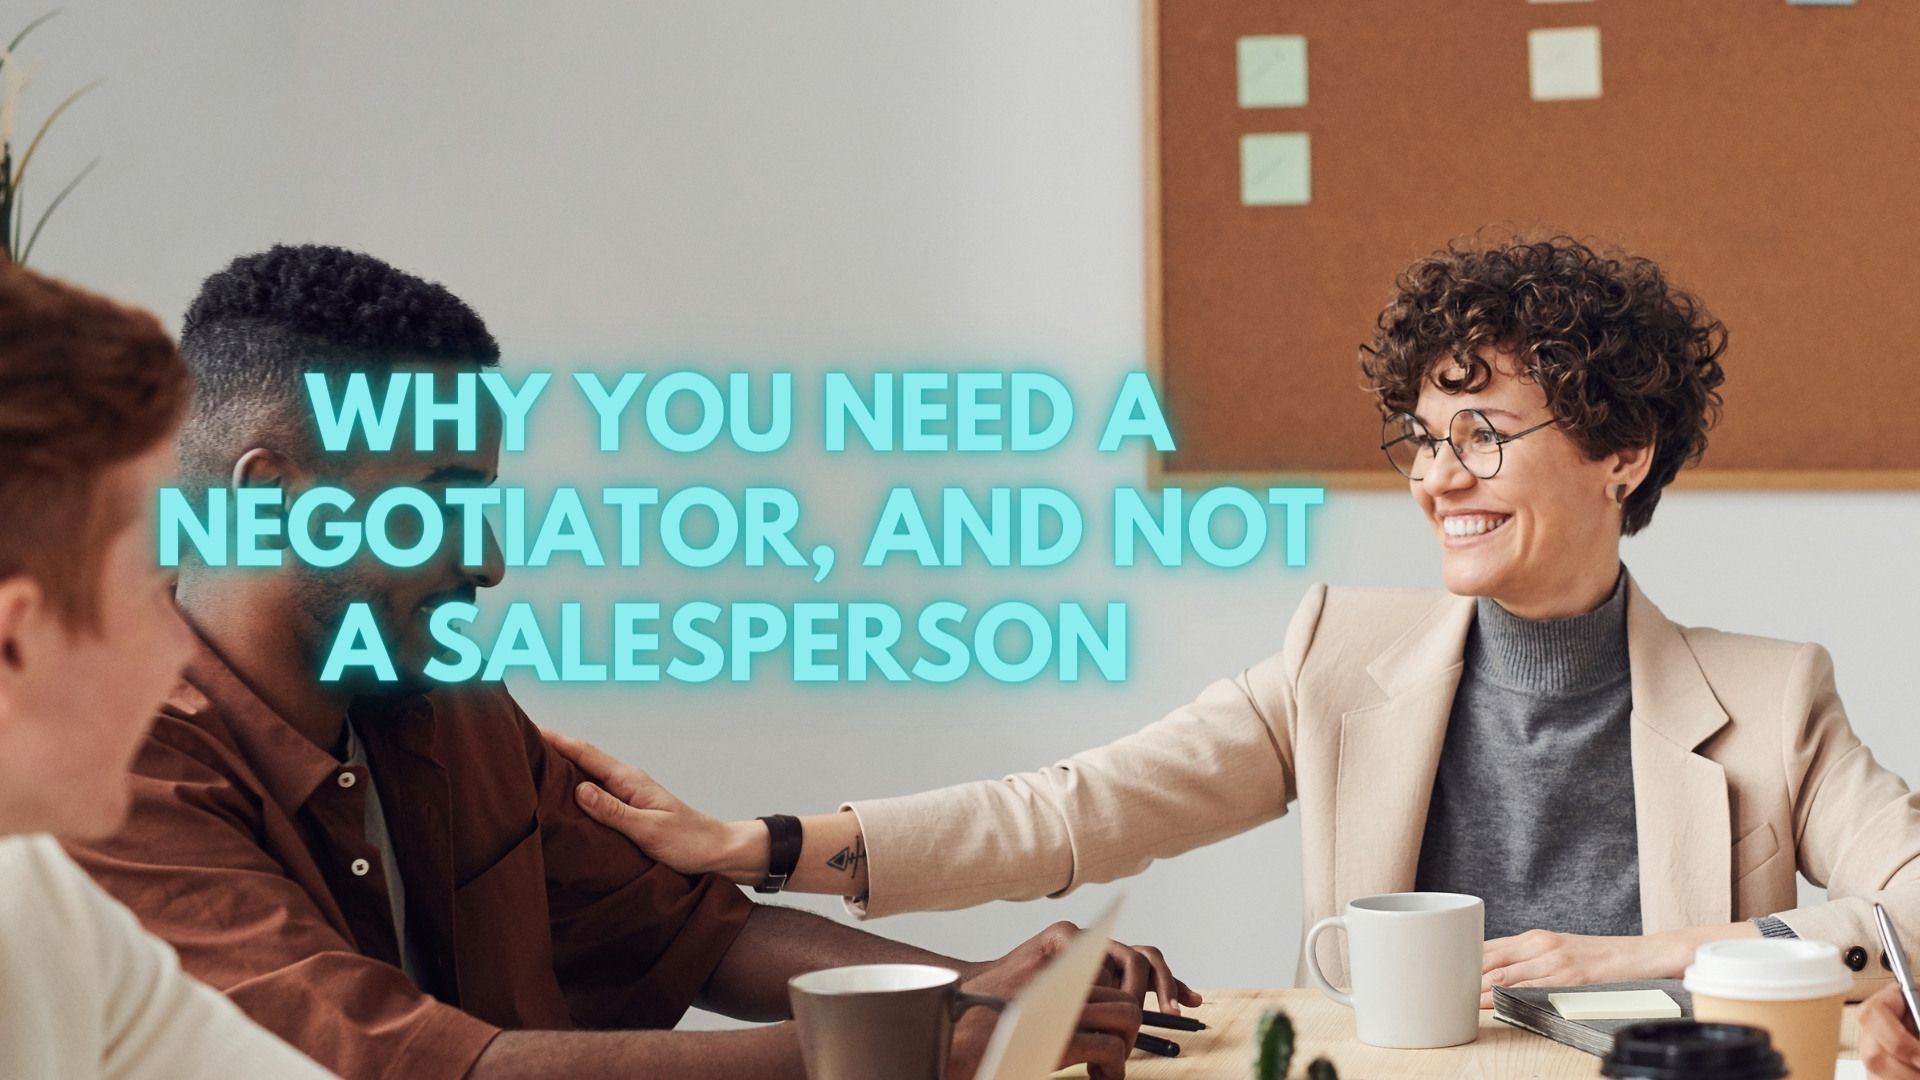 Why You Need A Negotiator, Not A Salesperson